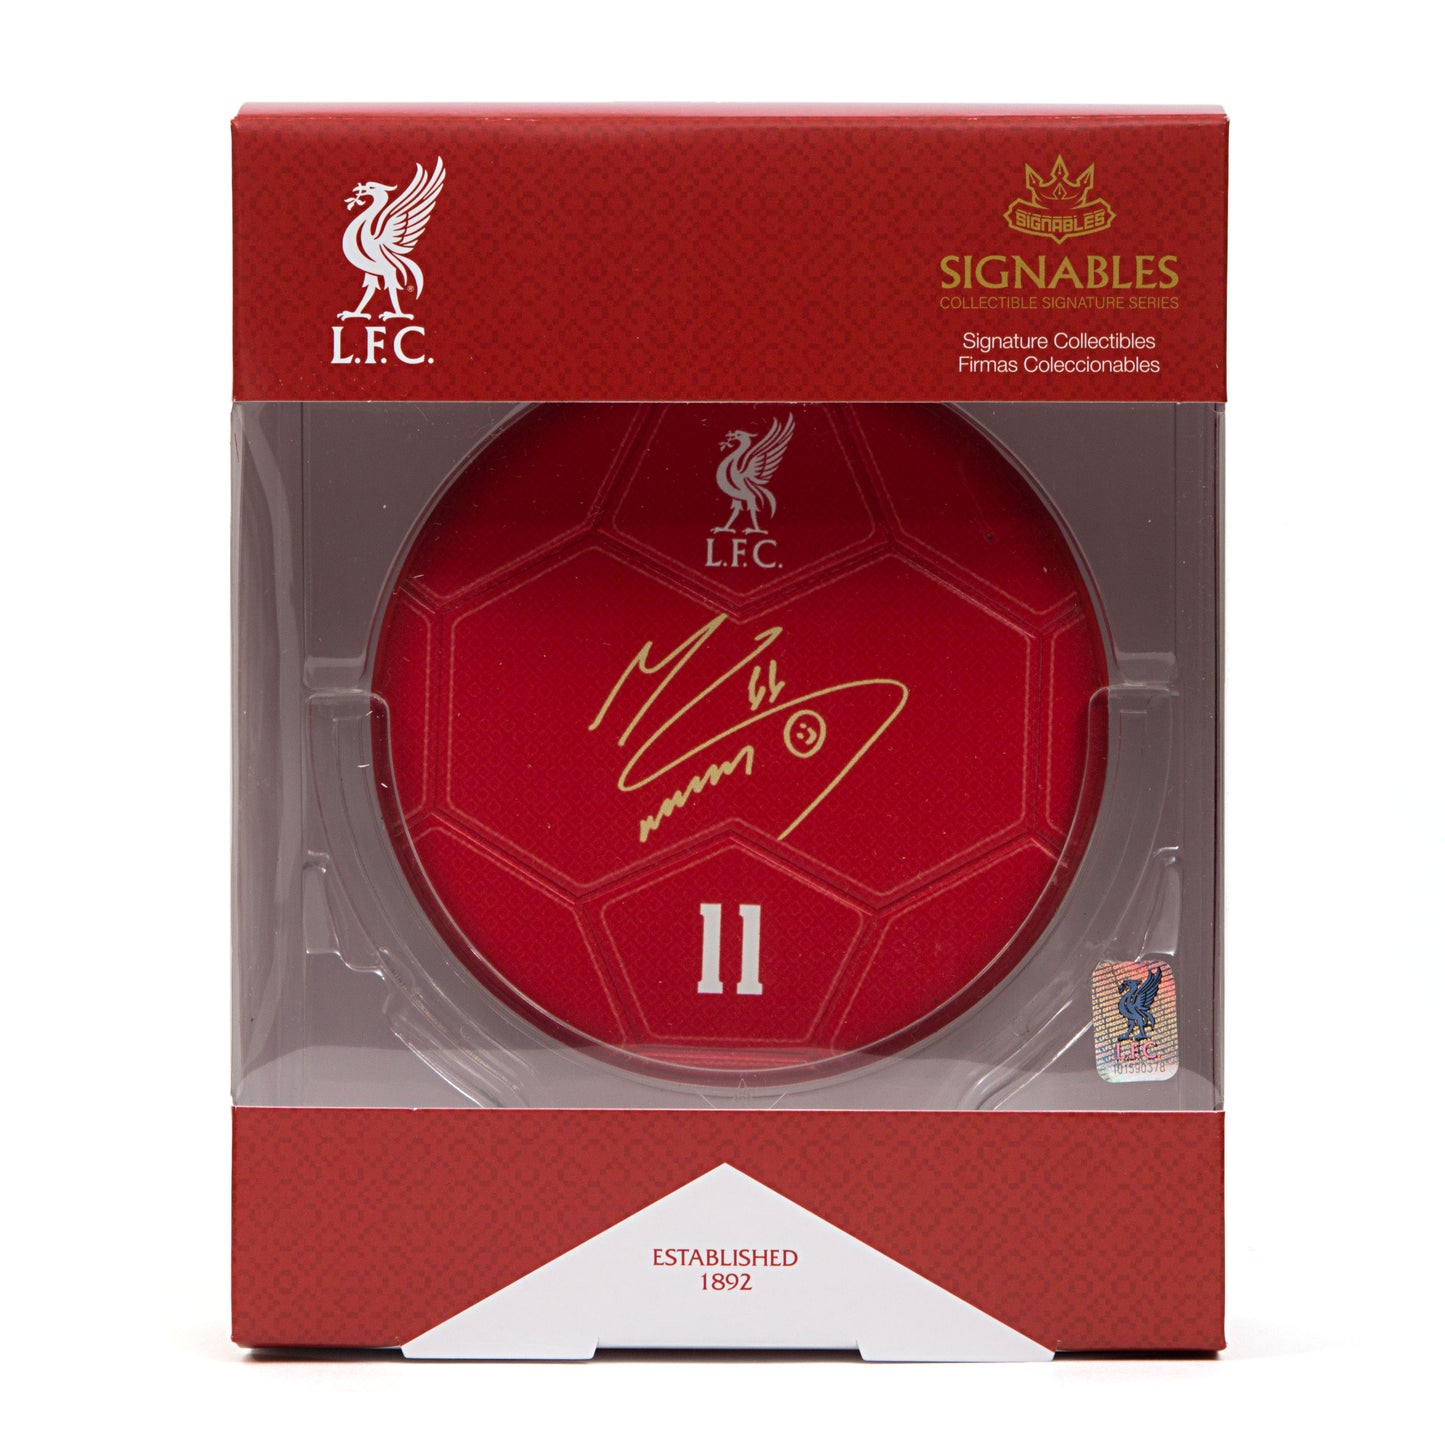 Mohamed Salah - Liverpool F.C. Signables Collectible for the biggest EPL fans